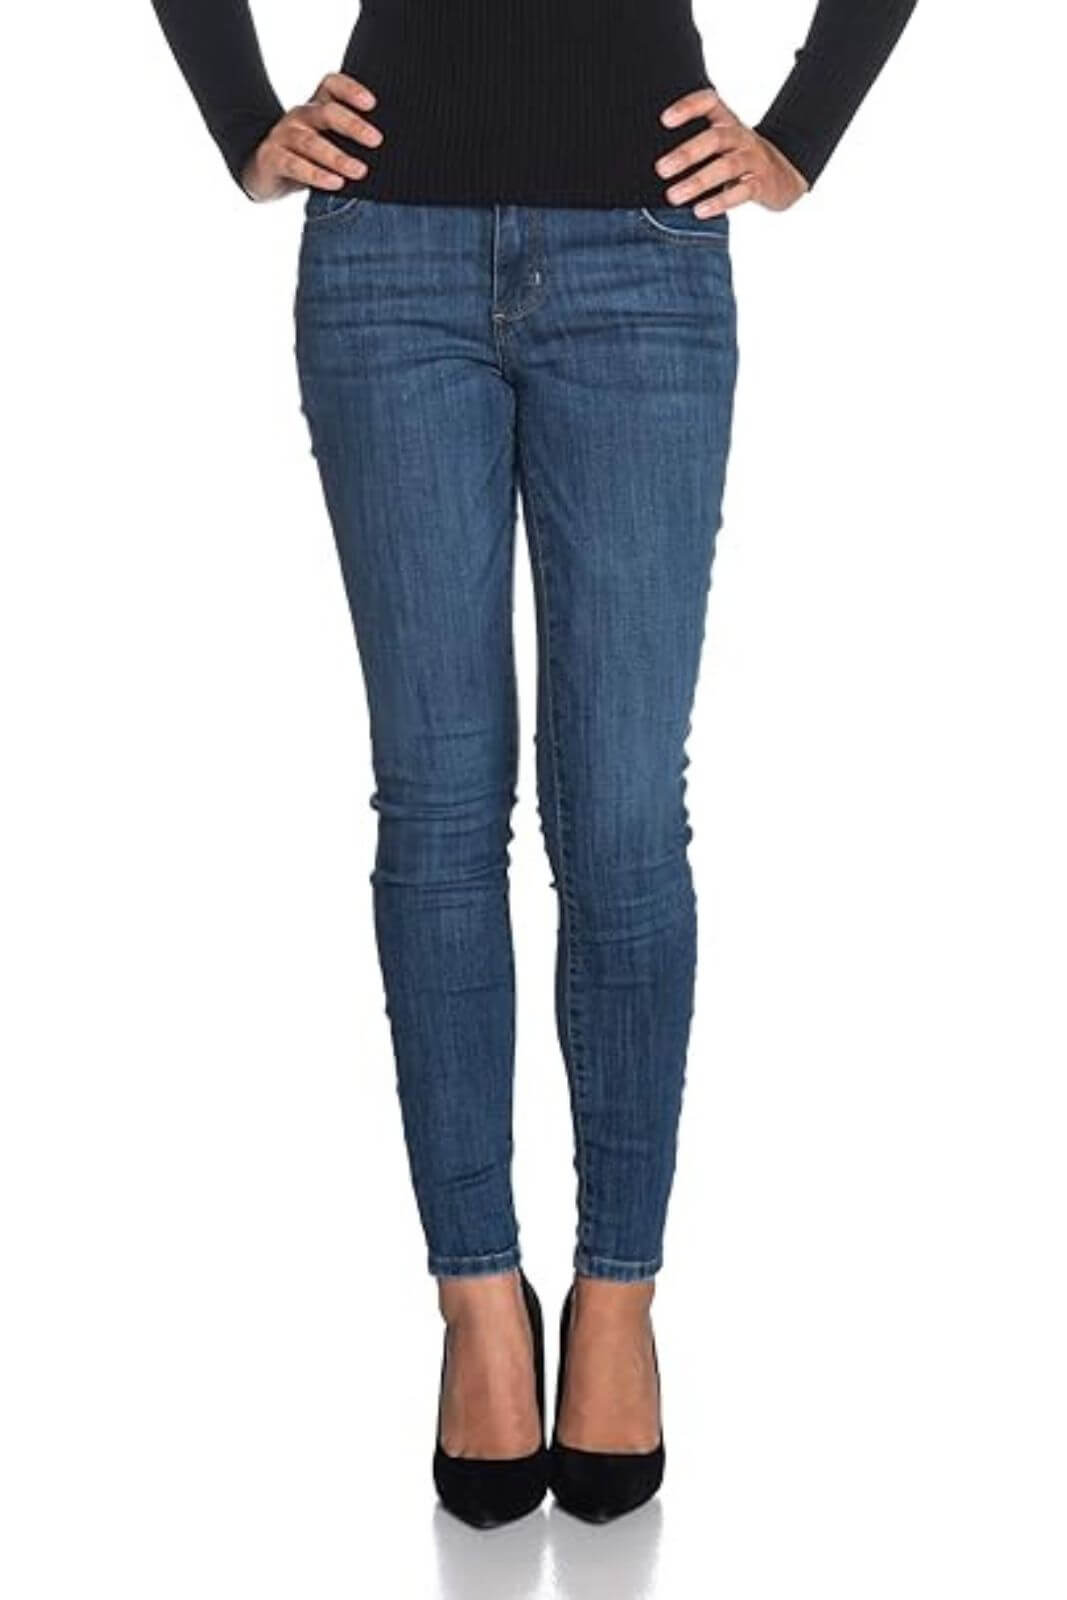 Guess jeans donna skinny